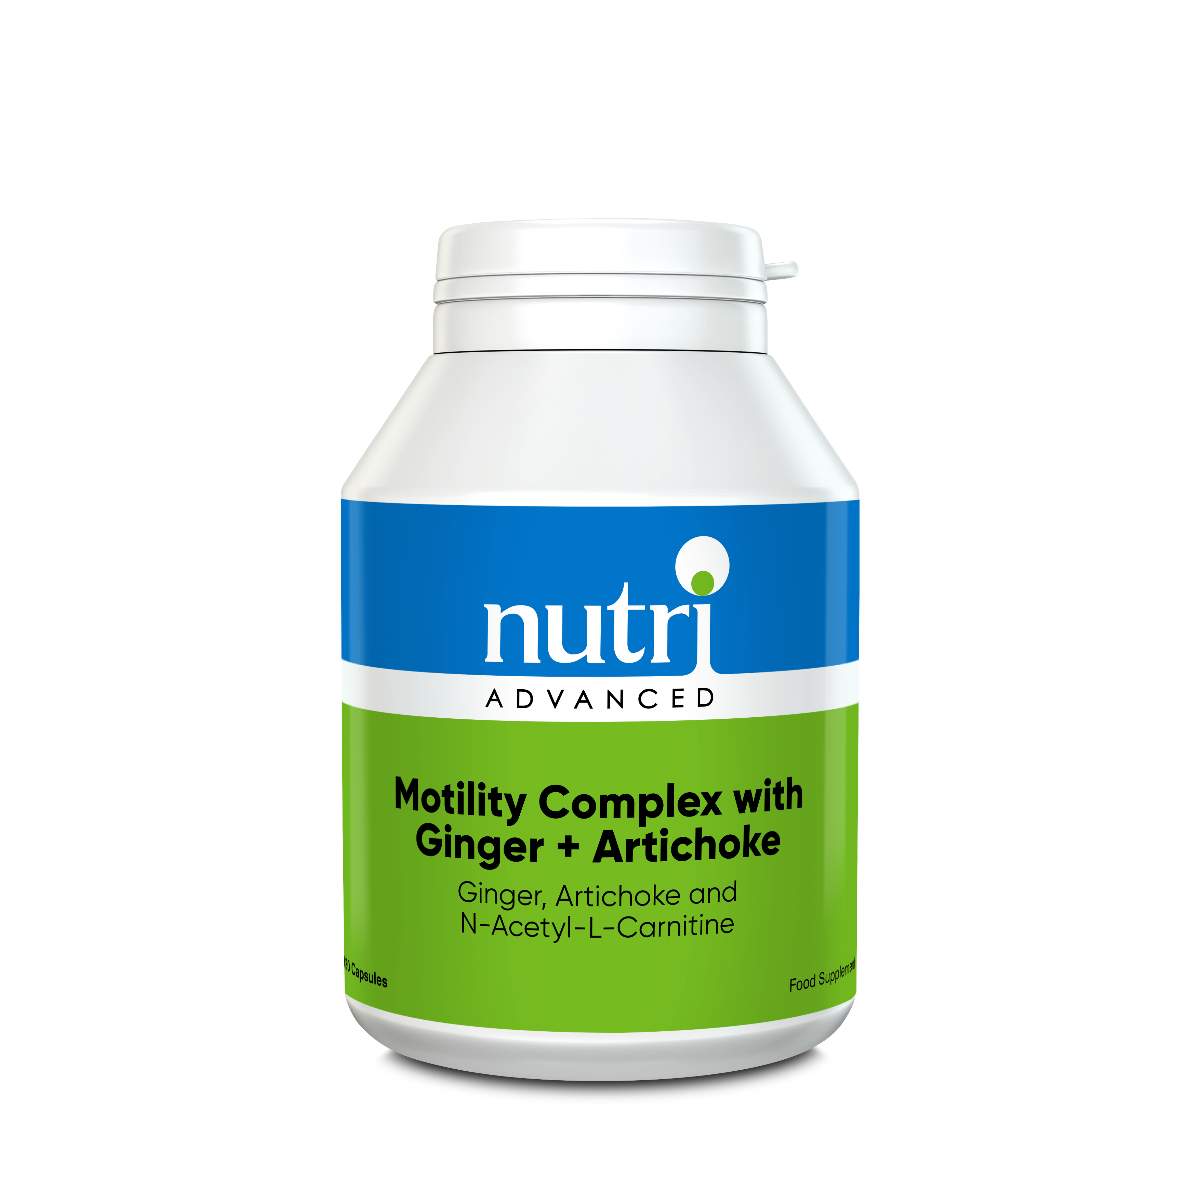 Motility Complex with Ginger & Artichoke - 120 Capsules | Nutri Advanced